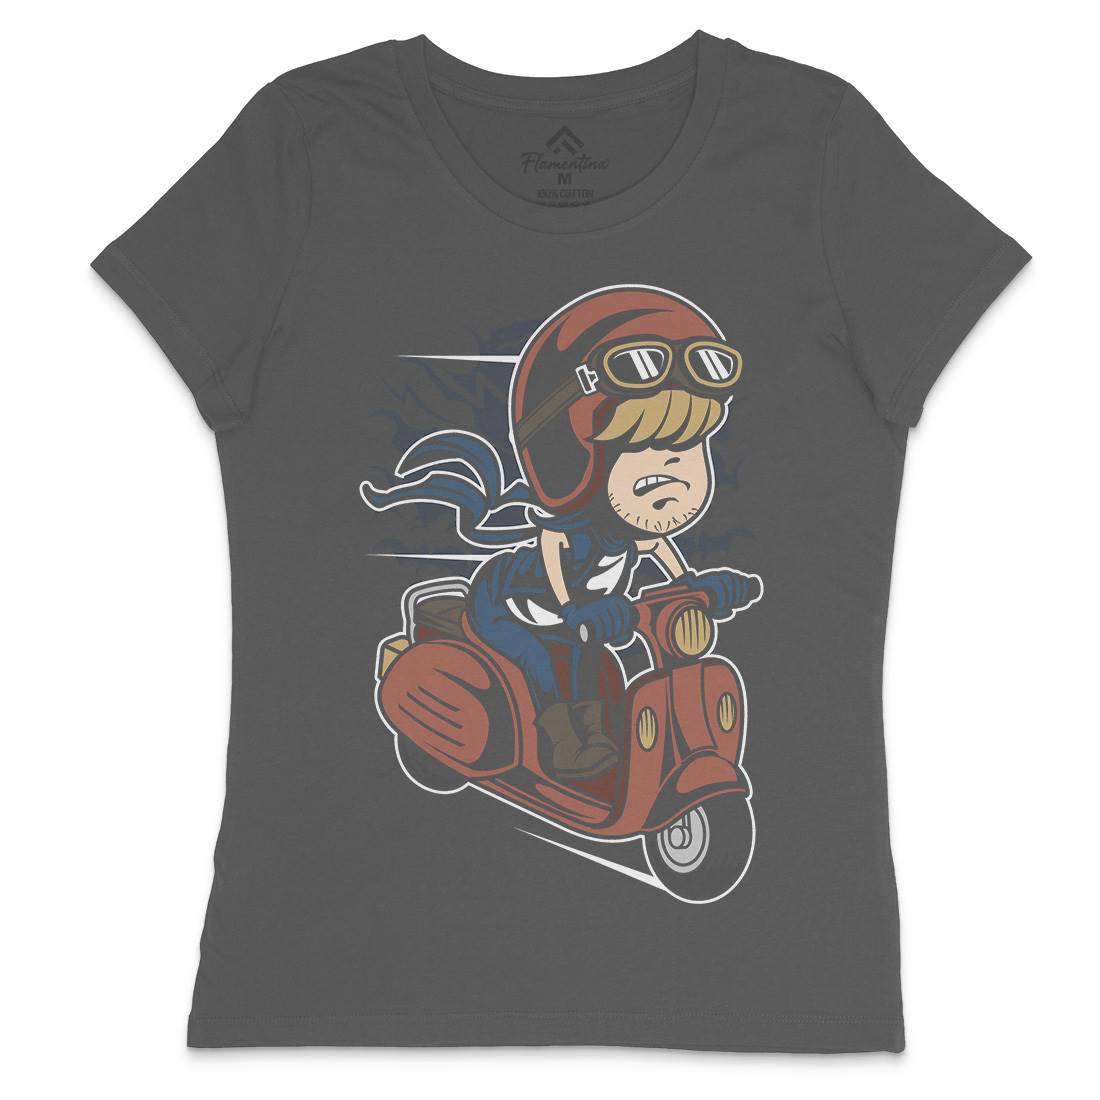 Scooter Rider Kid Womens Crew Neck T-Shirt Motorcycles C436